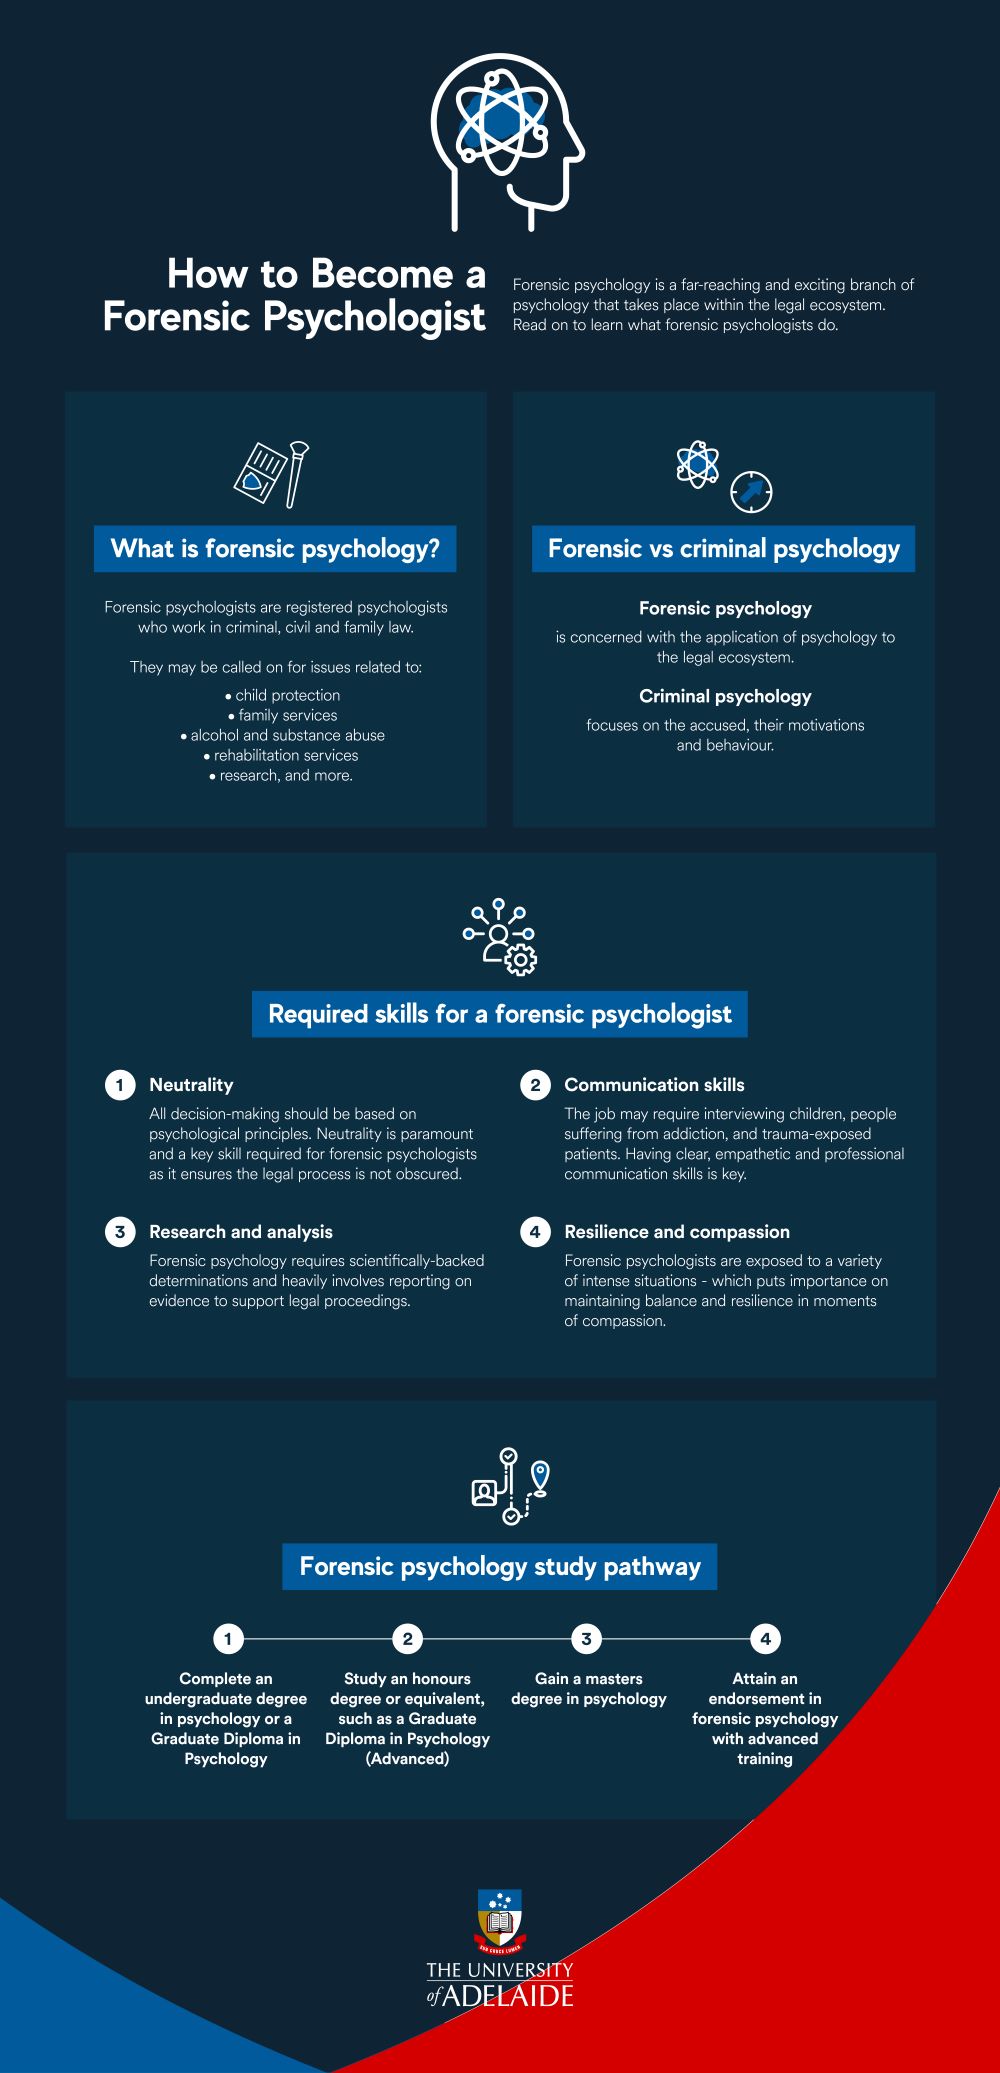 How to become a forensic psychologist